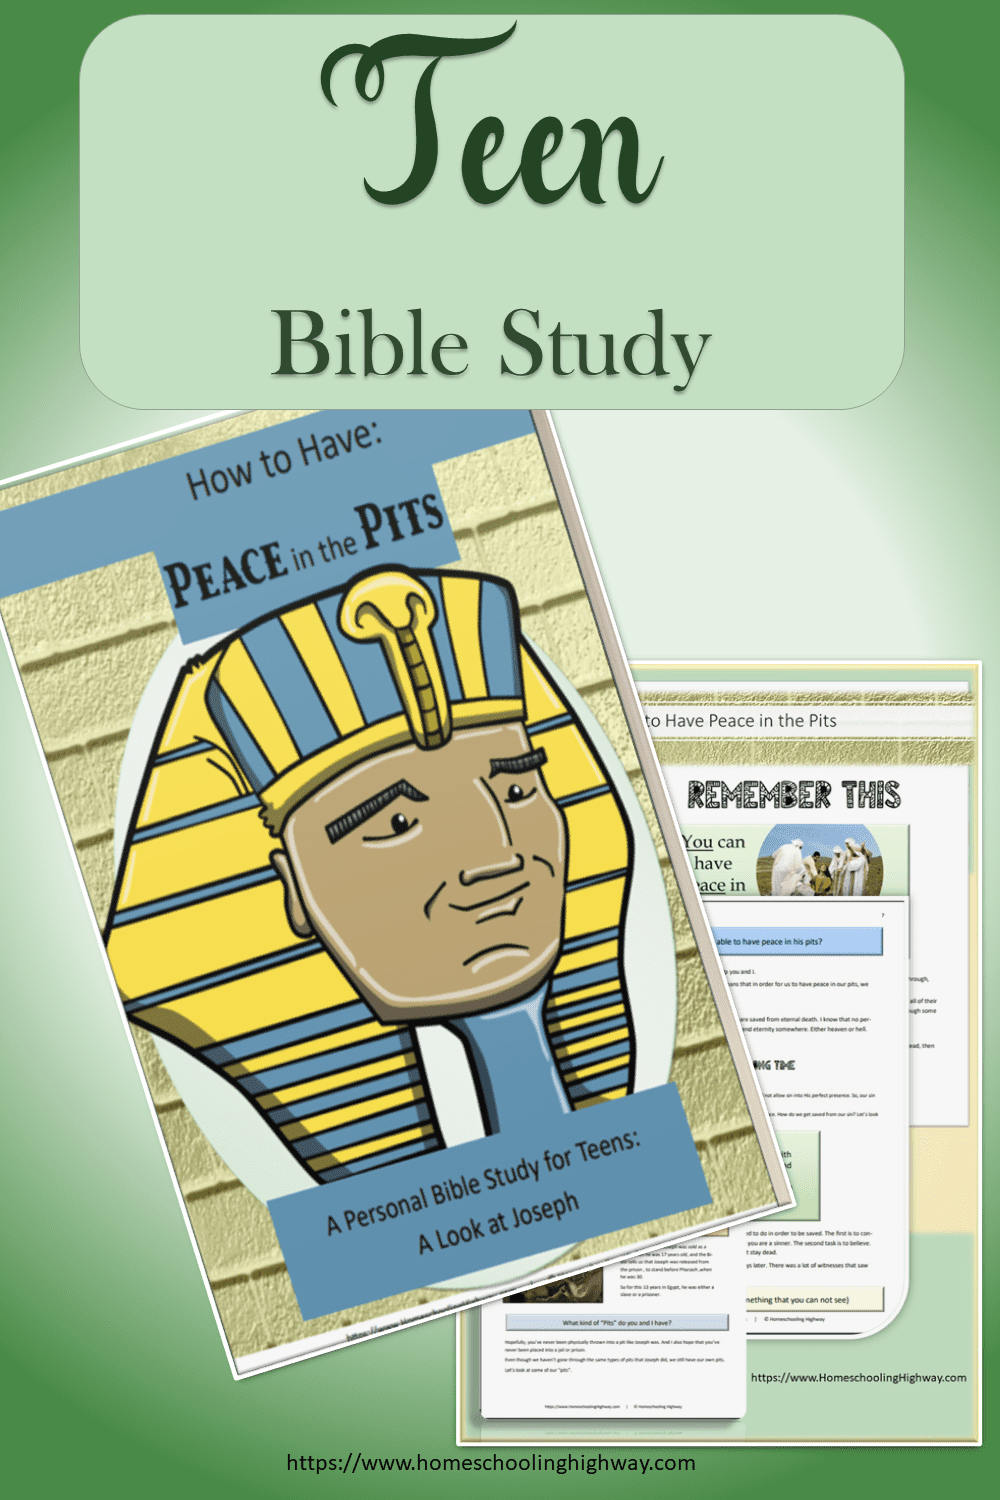 How to Have Peace in the Pits. A Teen Bible Study by Homeschooling Highway